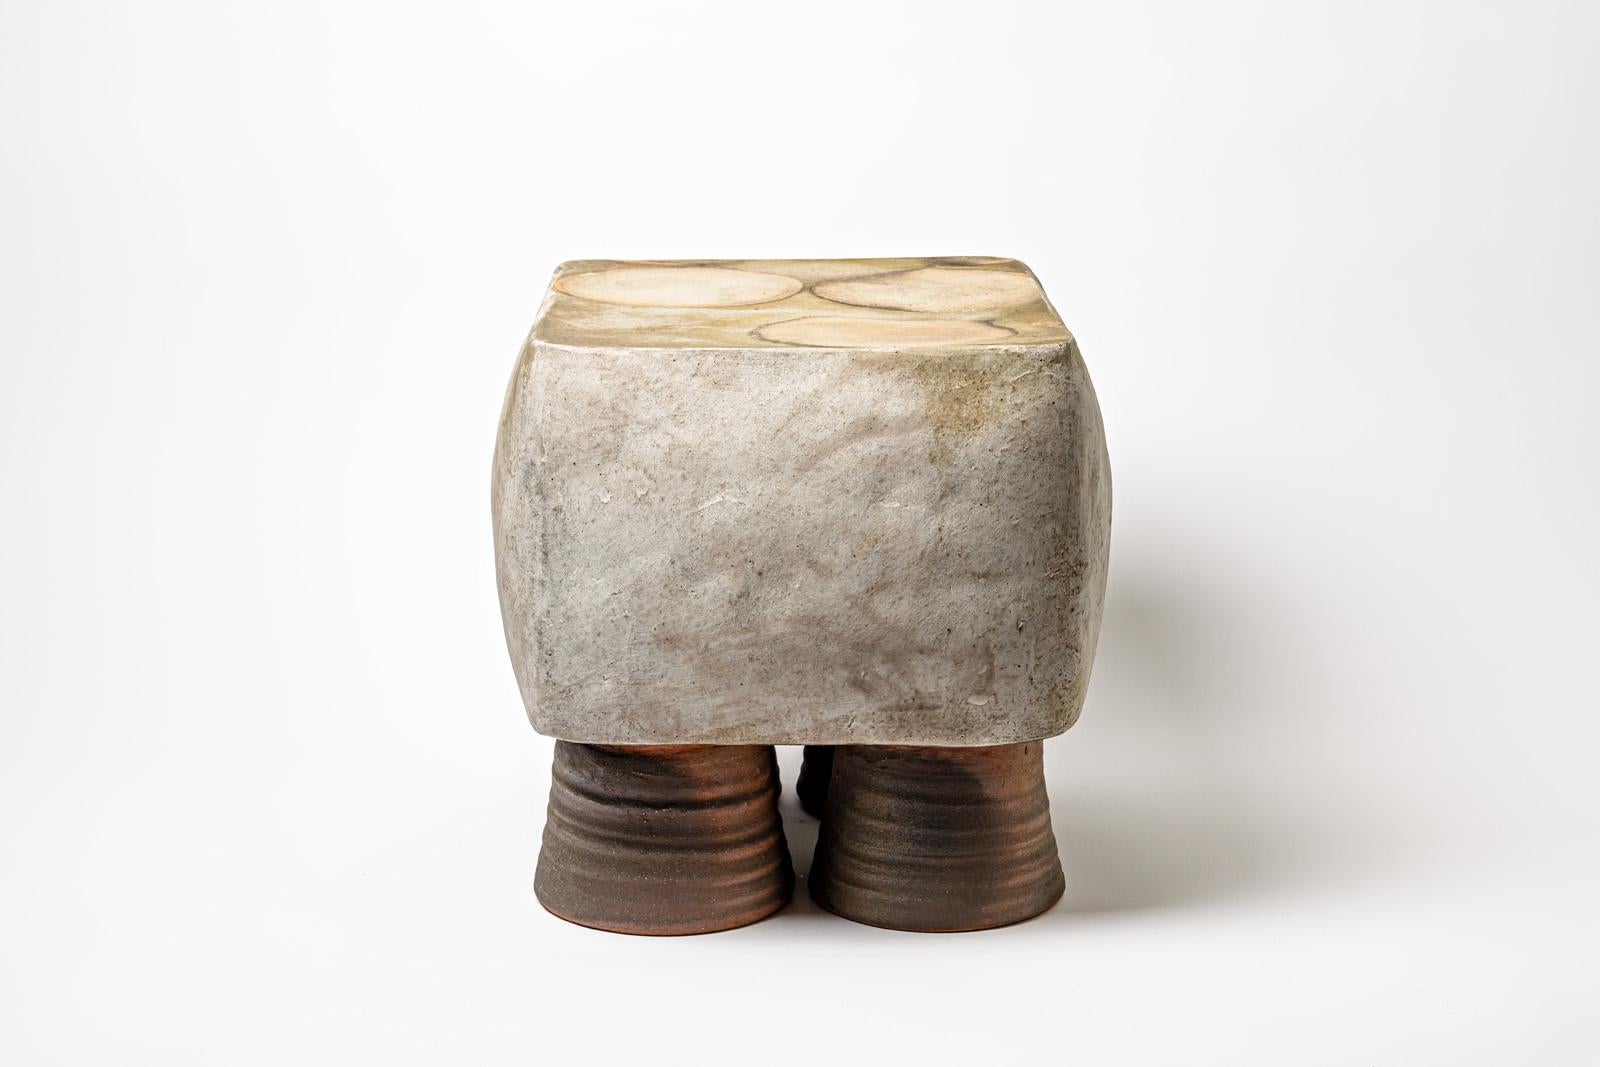 Contemporary Wood Fired Ceramic Stool or Coffee Table by Mia Jensen, 2023